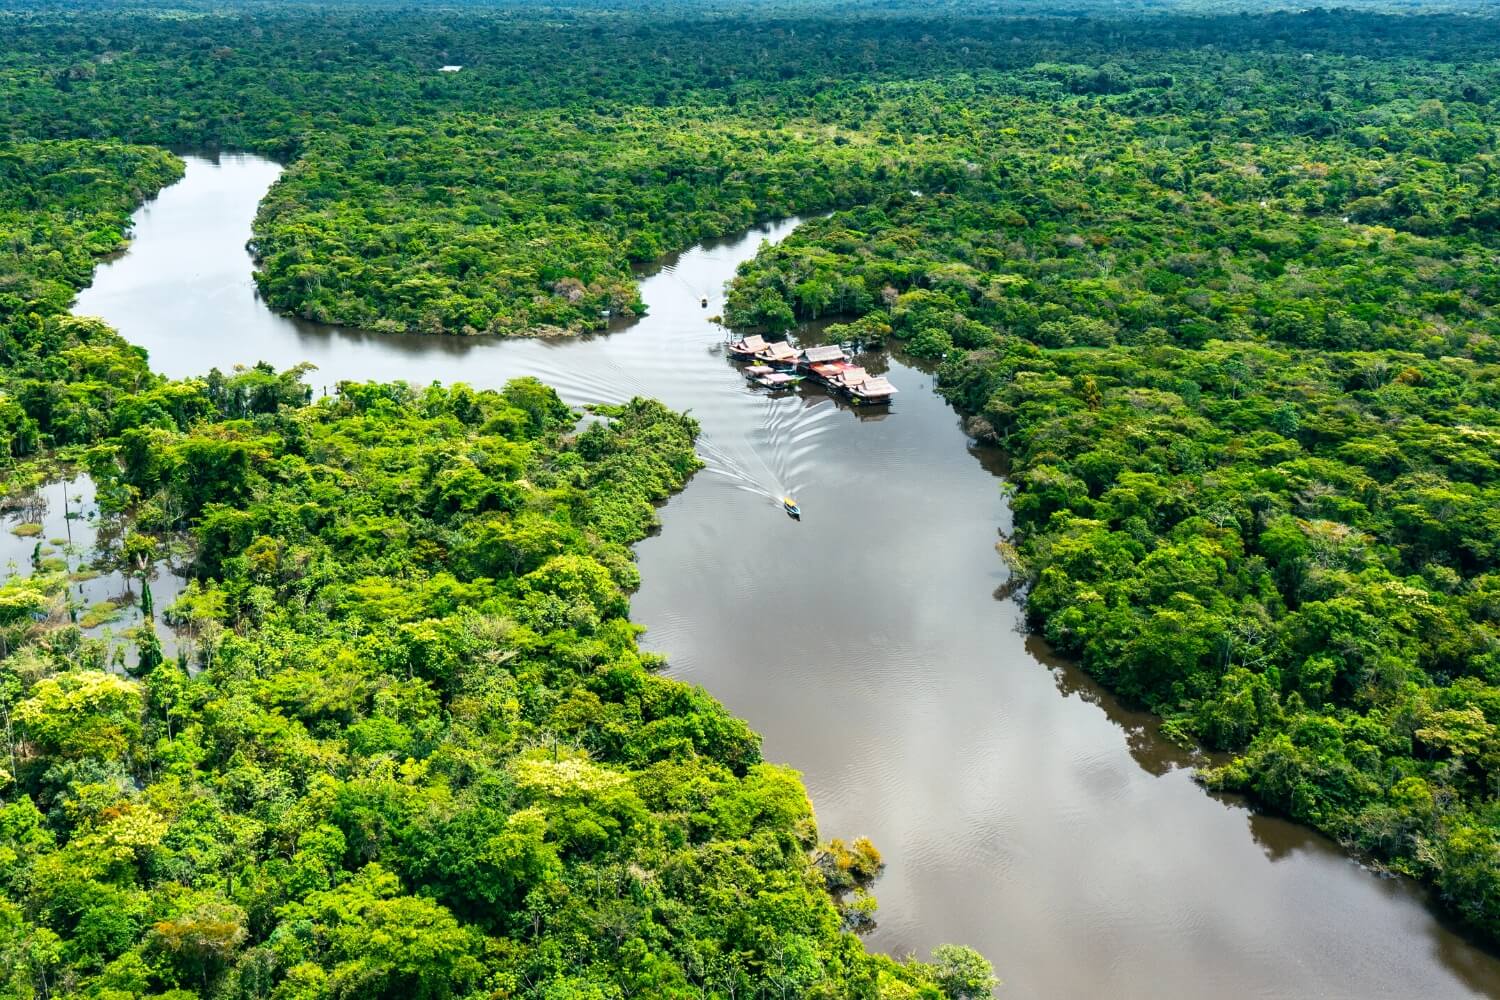 Amazon River: One of the most visited tourist places in the jungle